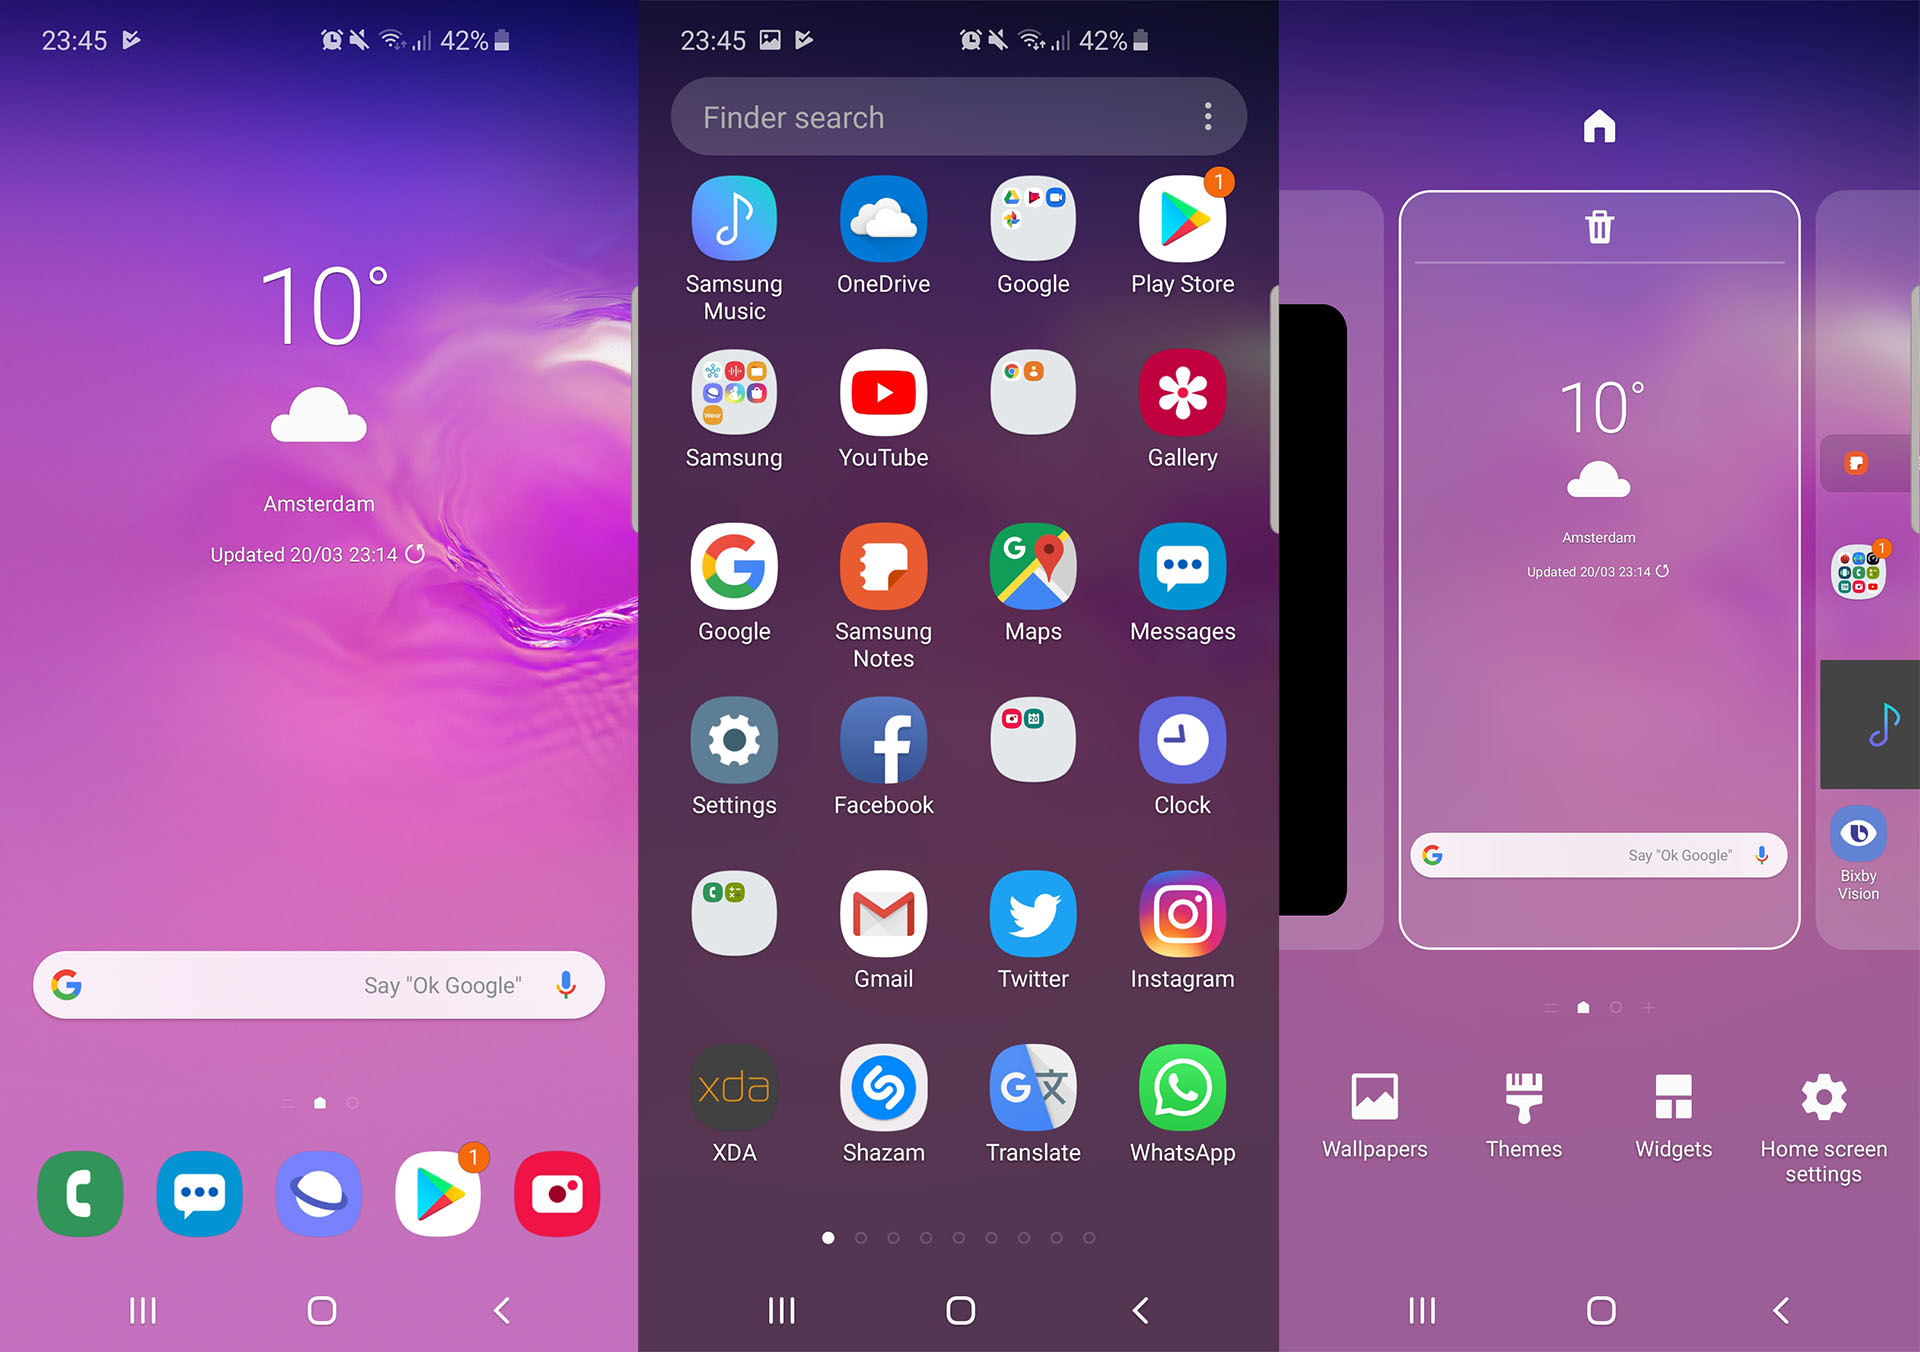 Android 14 ui. Samsung Galaxy s10 Интерфейс. Samsung Galaxy one UI. Samsung one UI 5. One UI 5 Samsung s10.